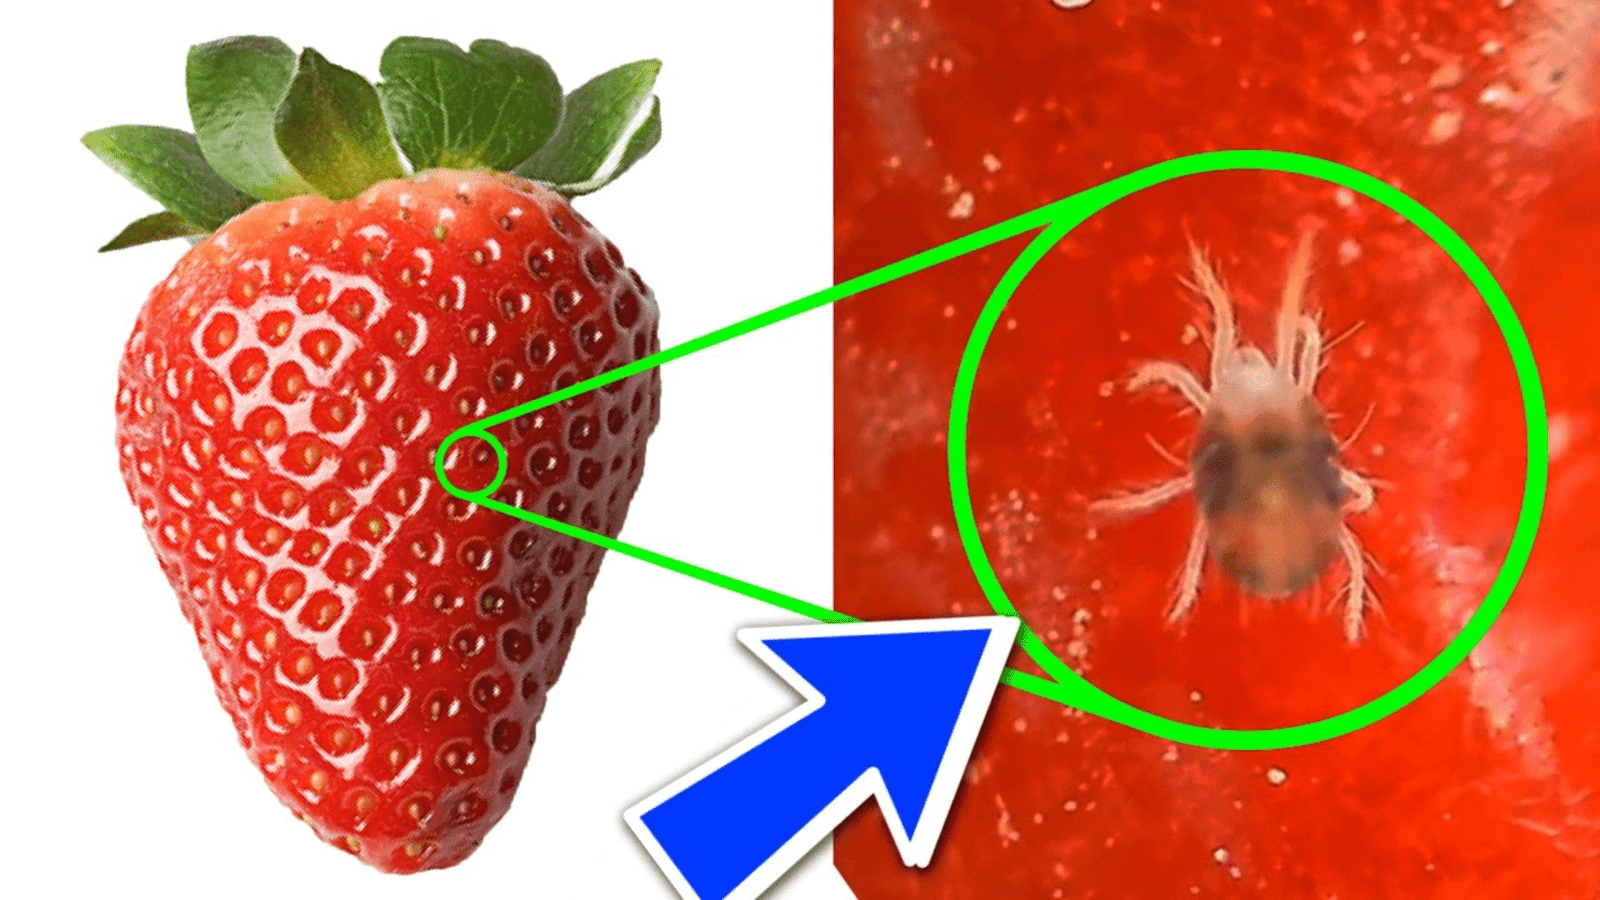 VIRAL VIDEO: tiny creepy bugs found in strawberry, netizens frightened